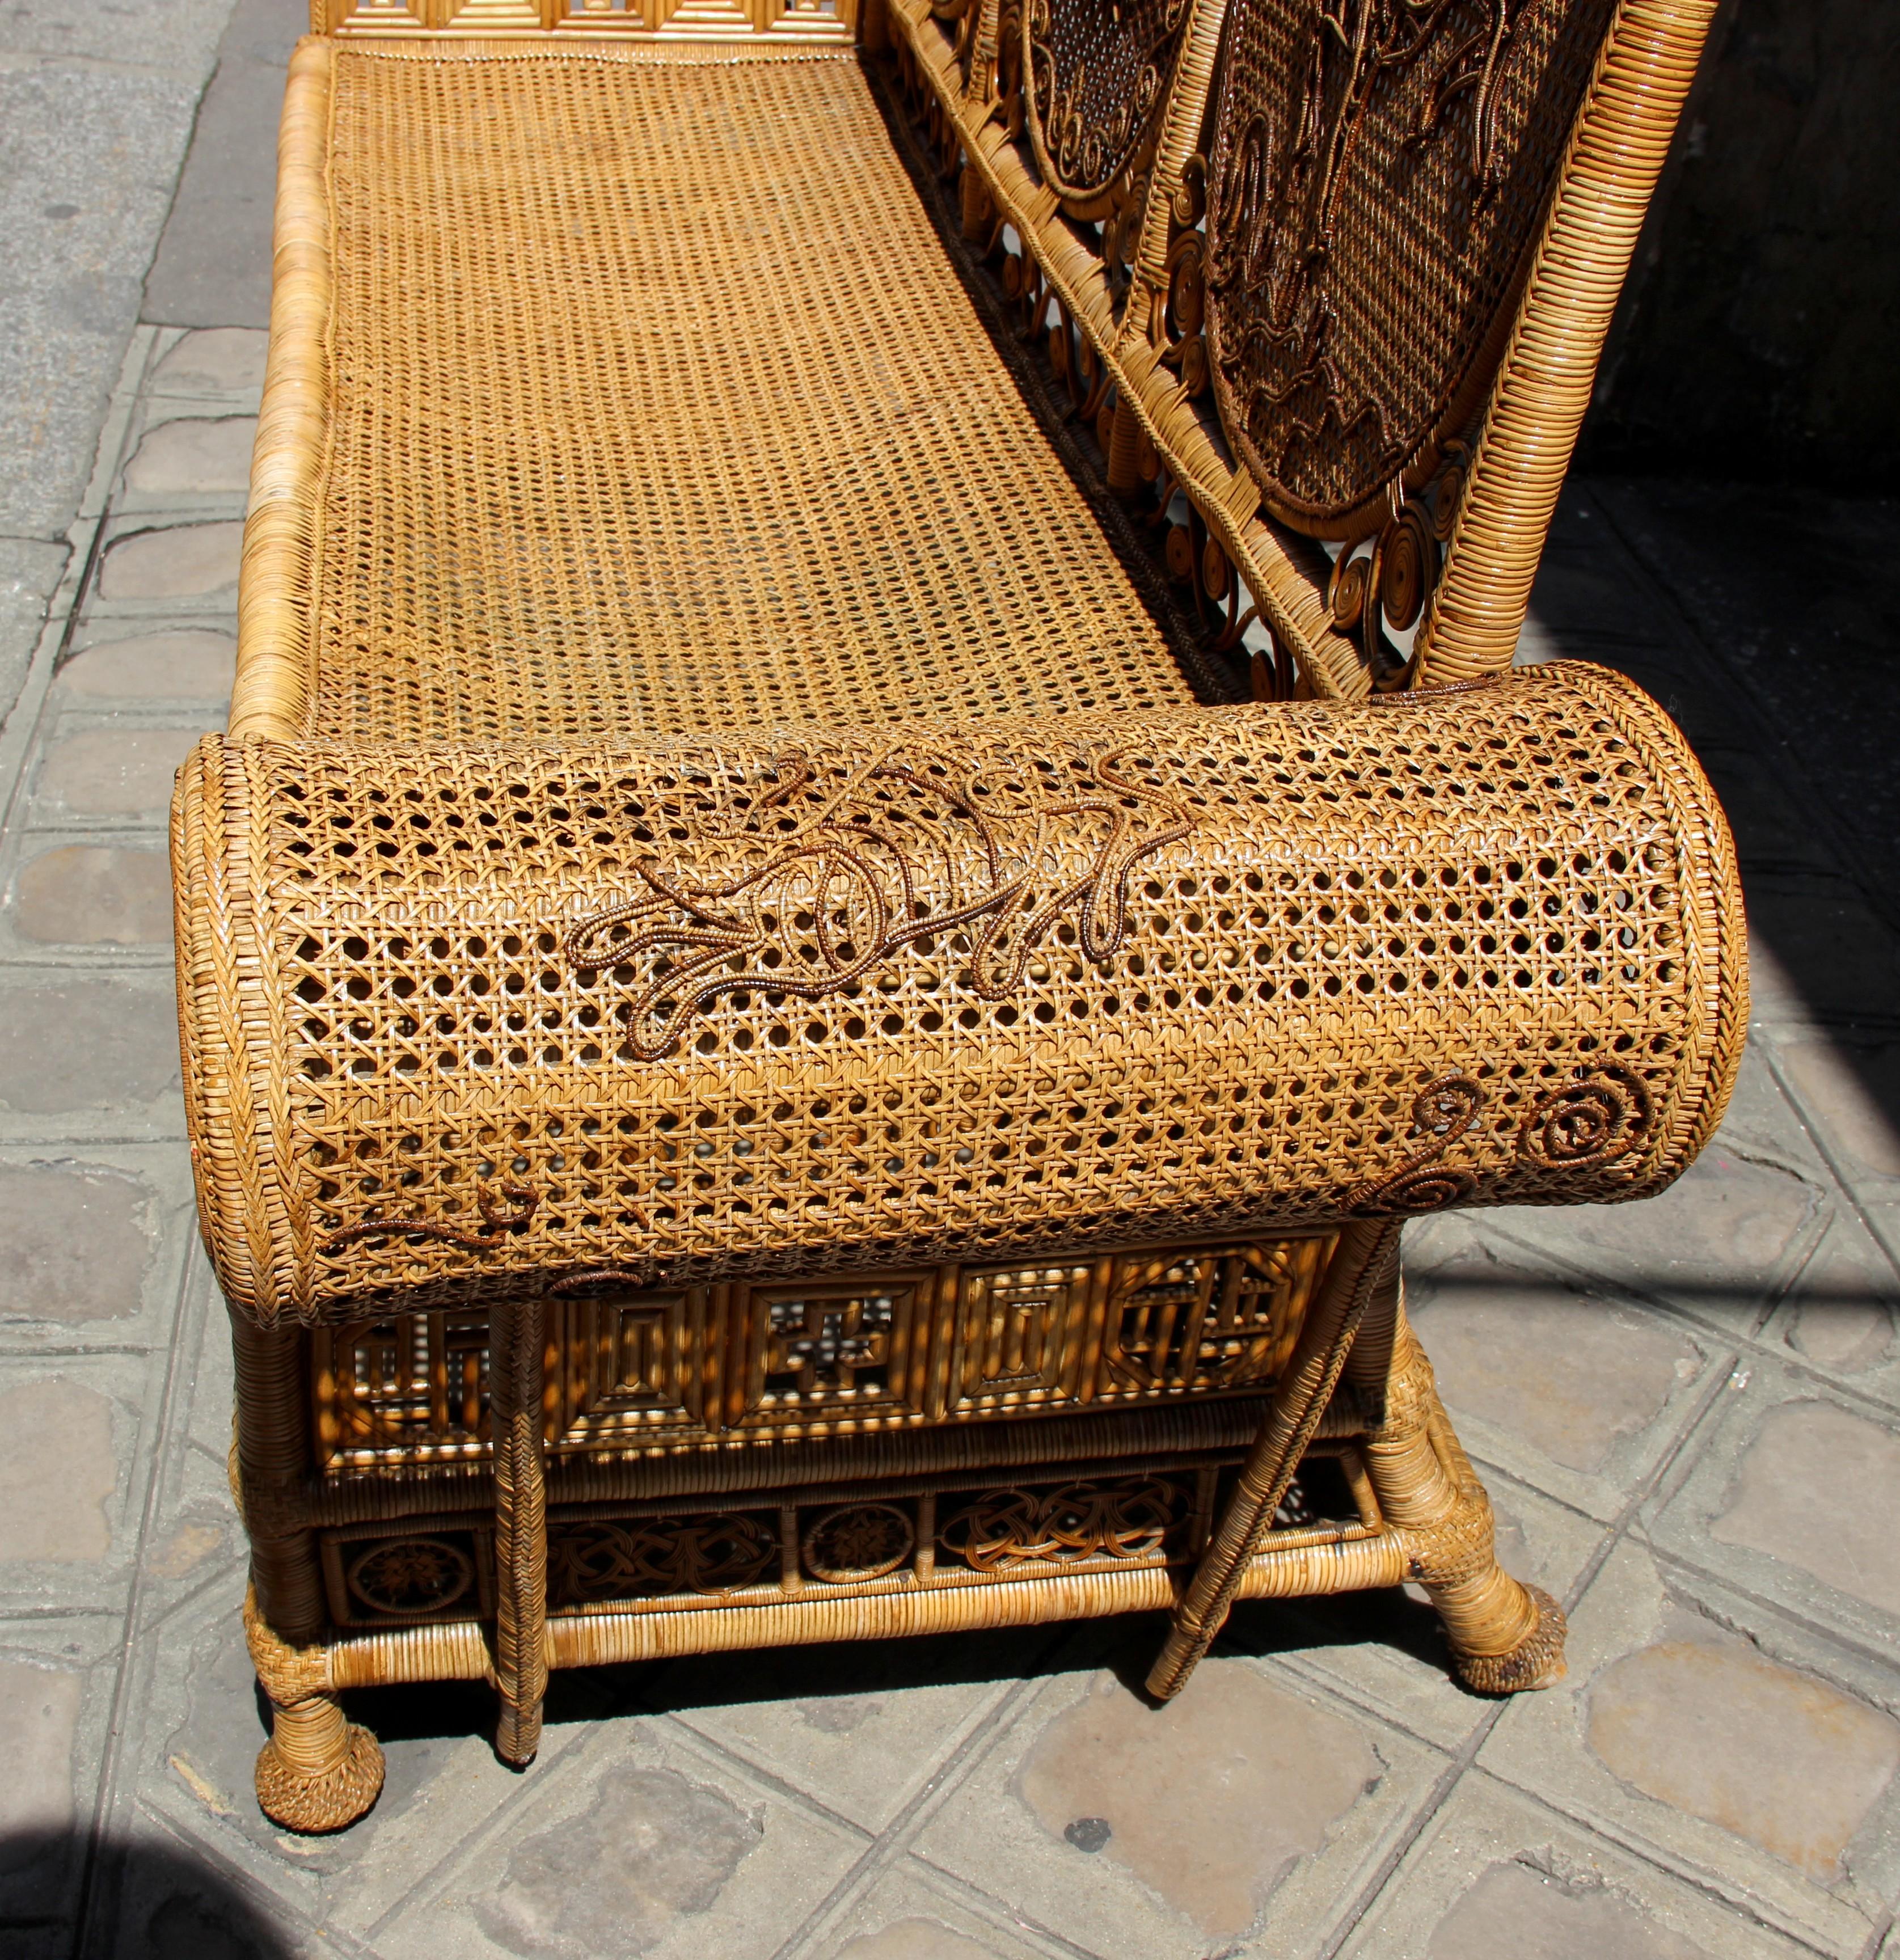 Mid-20th Century Rare Rattan Caned Sofa with a Fine Decor, France or Asia, circa 1930 For Sale